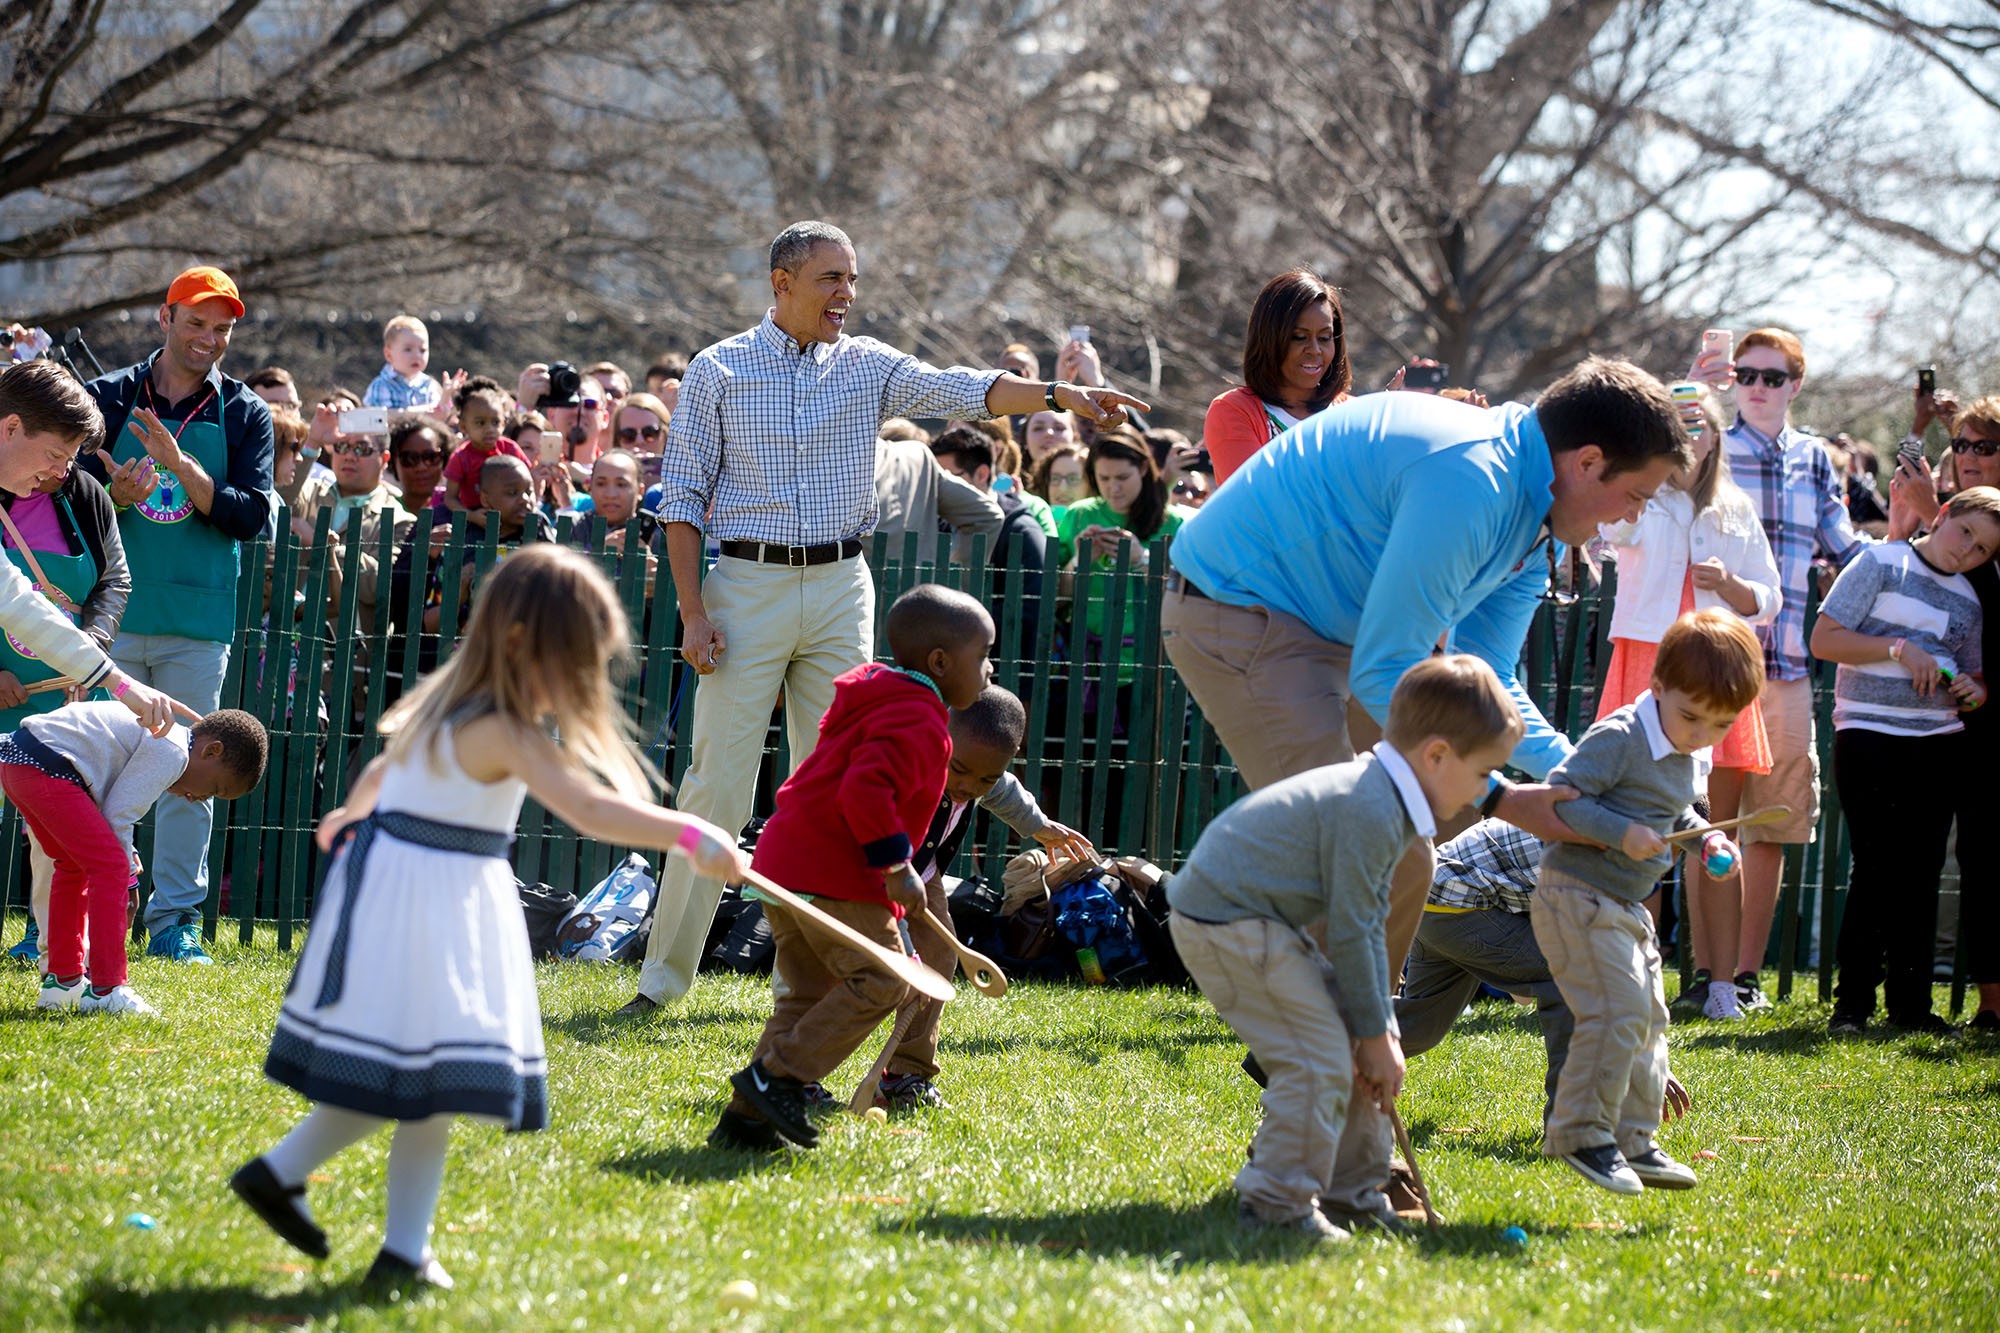 In Pictures The White House Easter Egg Roll whitehouse.gov